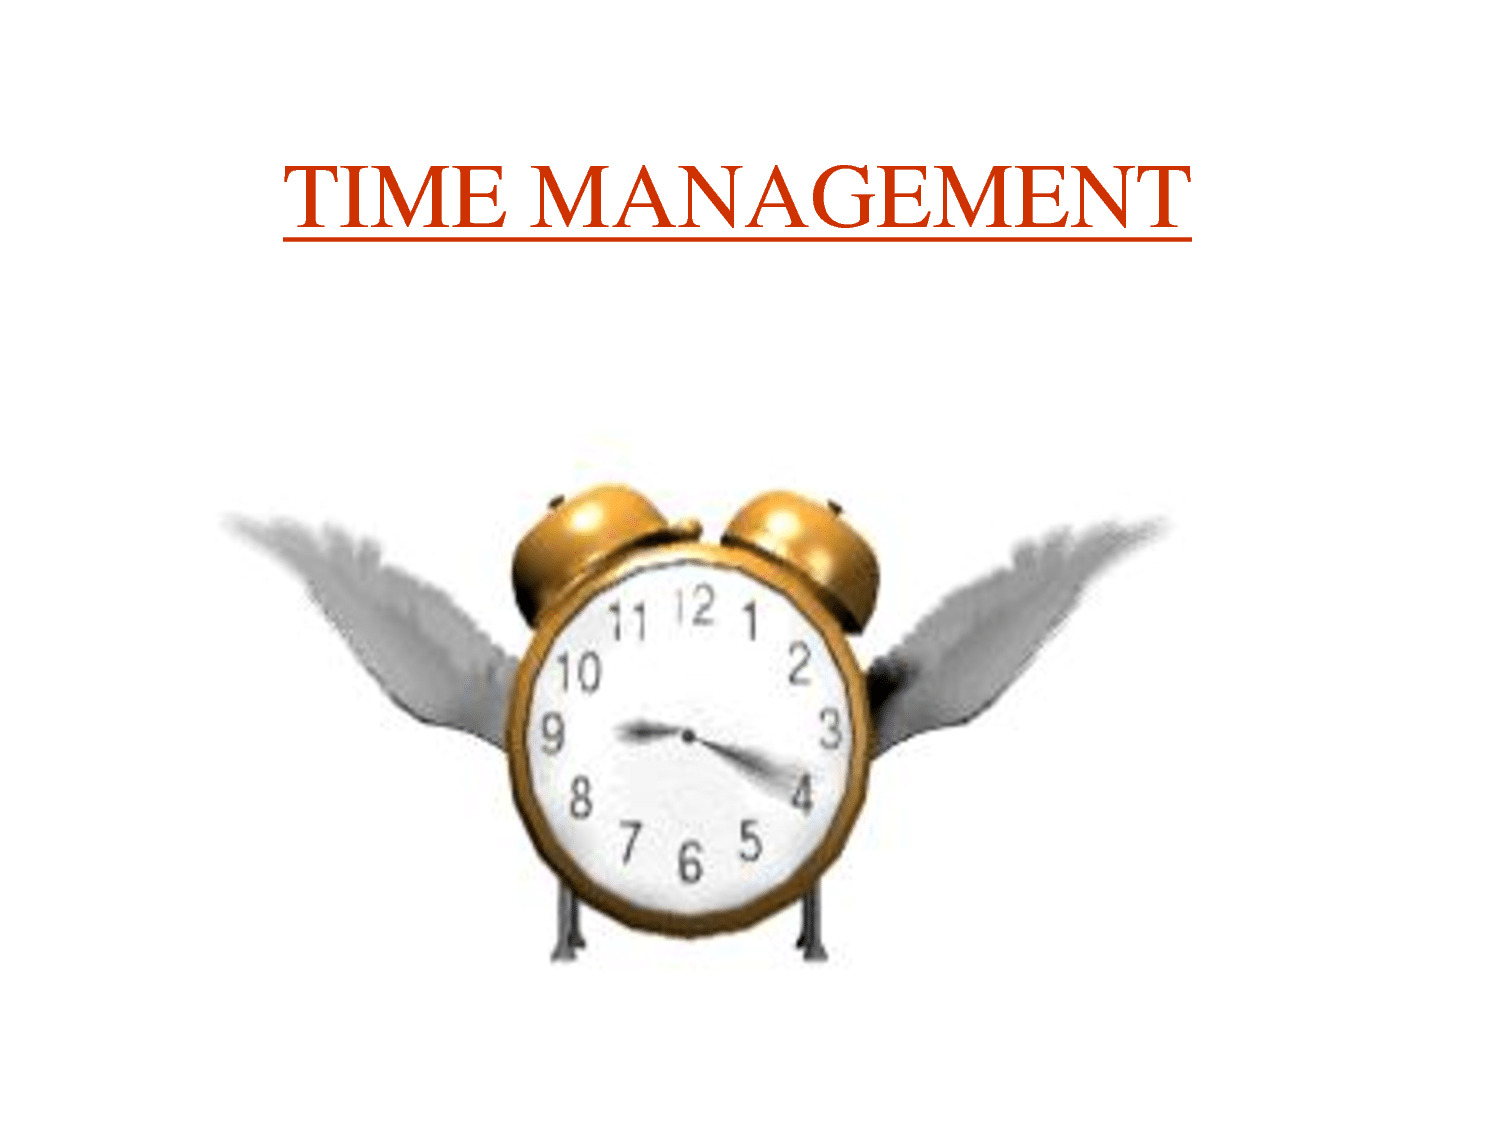 time management picture for presentation